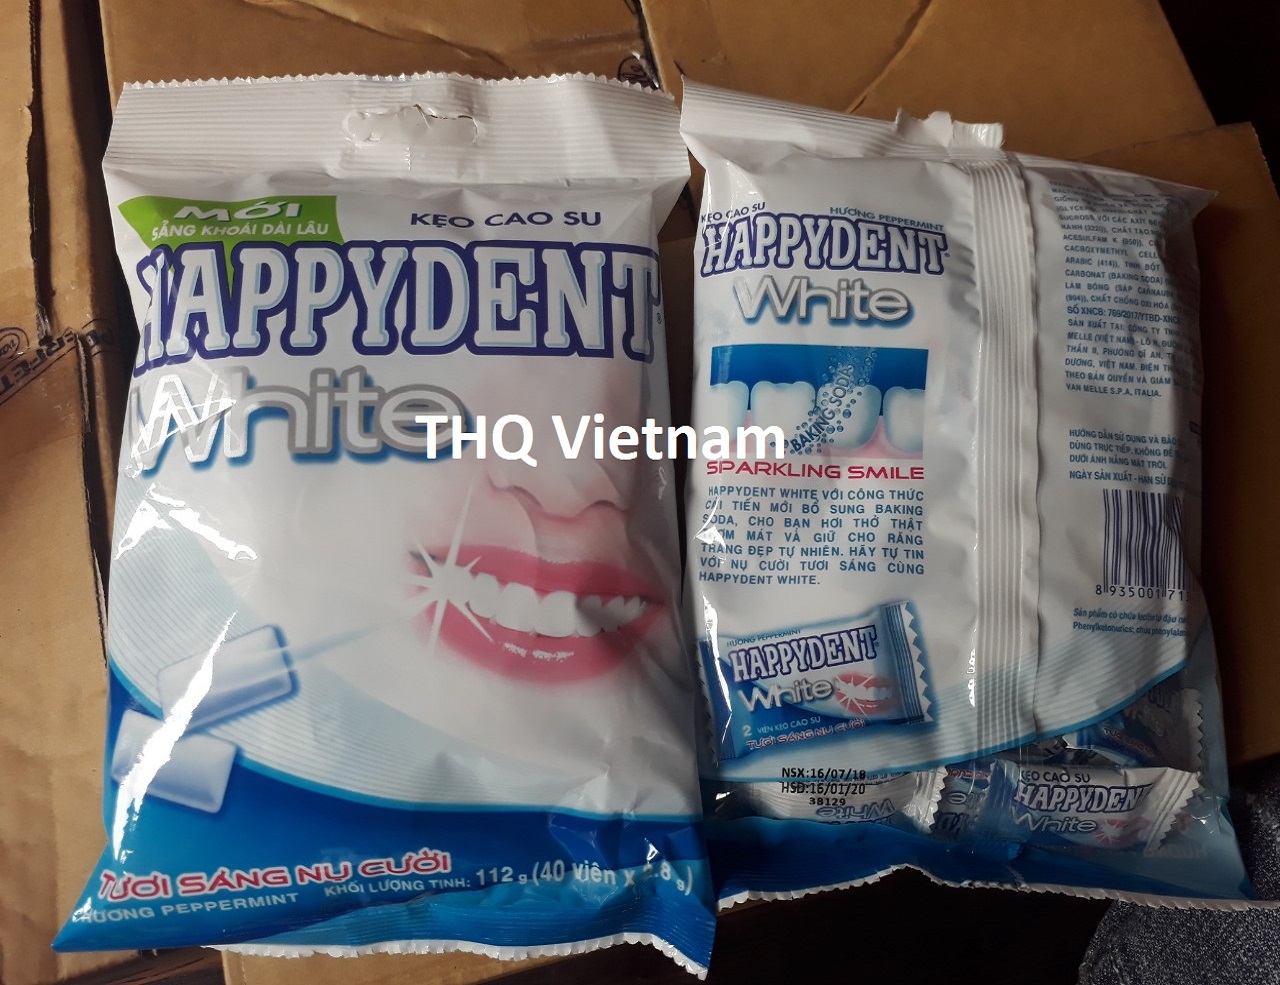 Happydent White chewing gum 112 gram x 45 bags